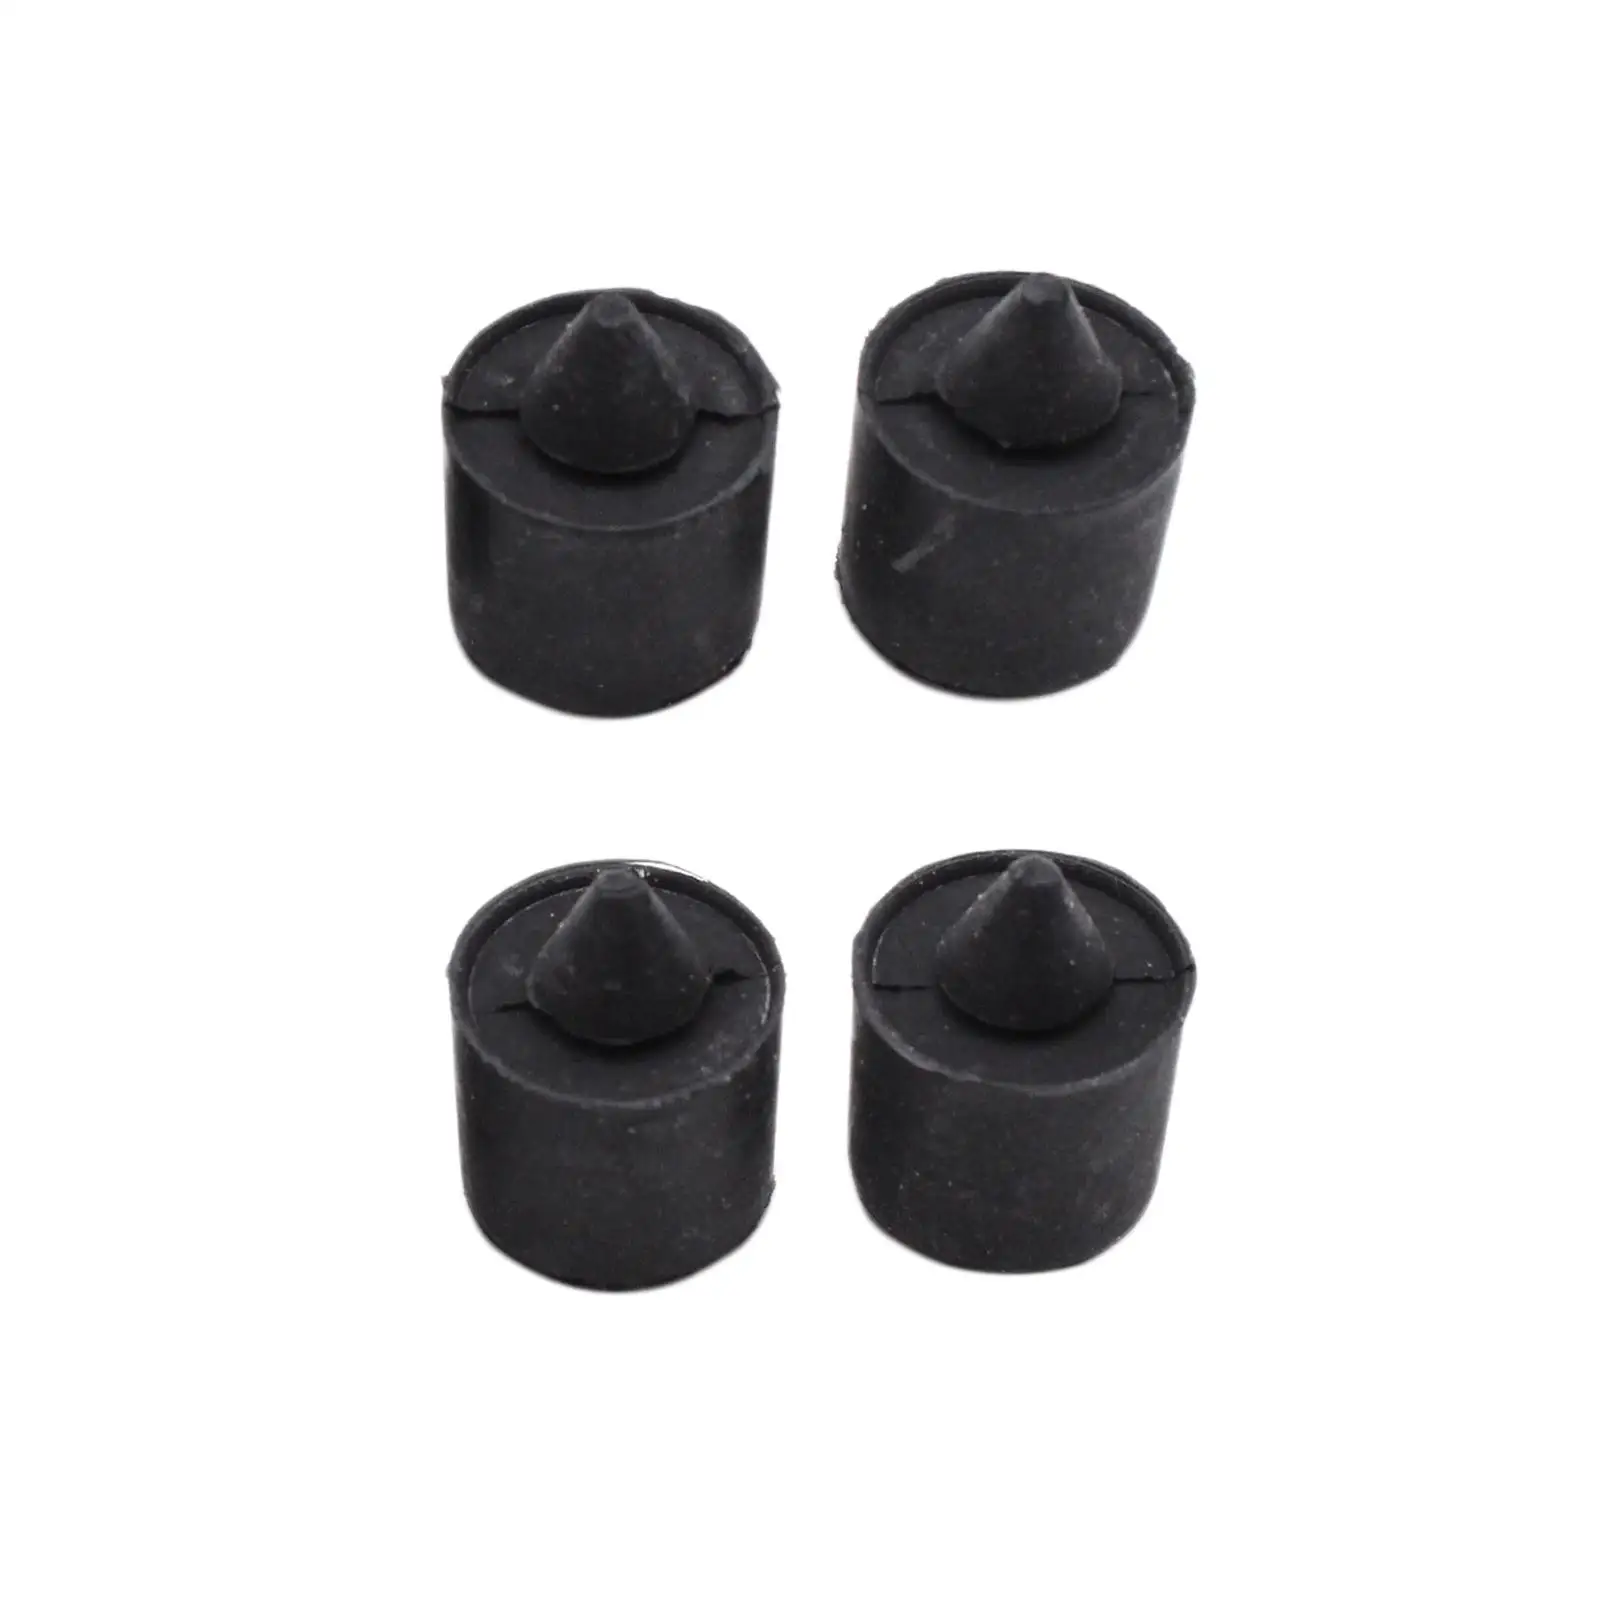 4 Pieces Vehicle 16.5mm Exterior Rubber Bumpers W705903S300 W705903-S300 Black for Ford F150 Escape Ranger Replace